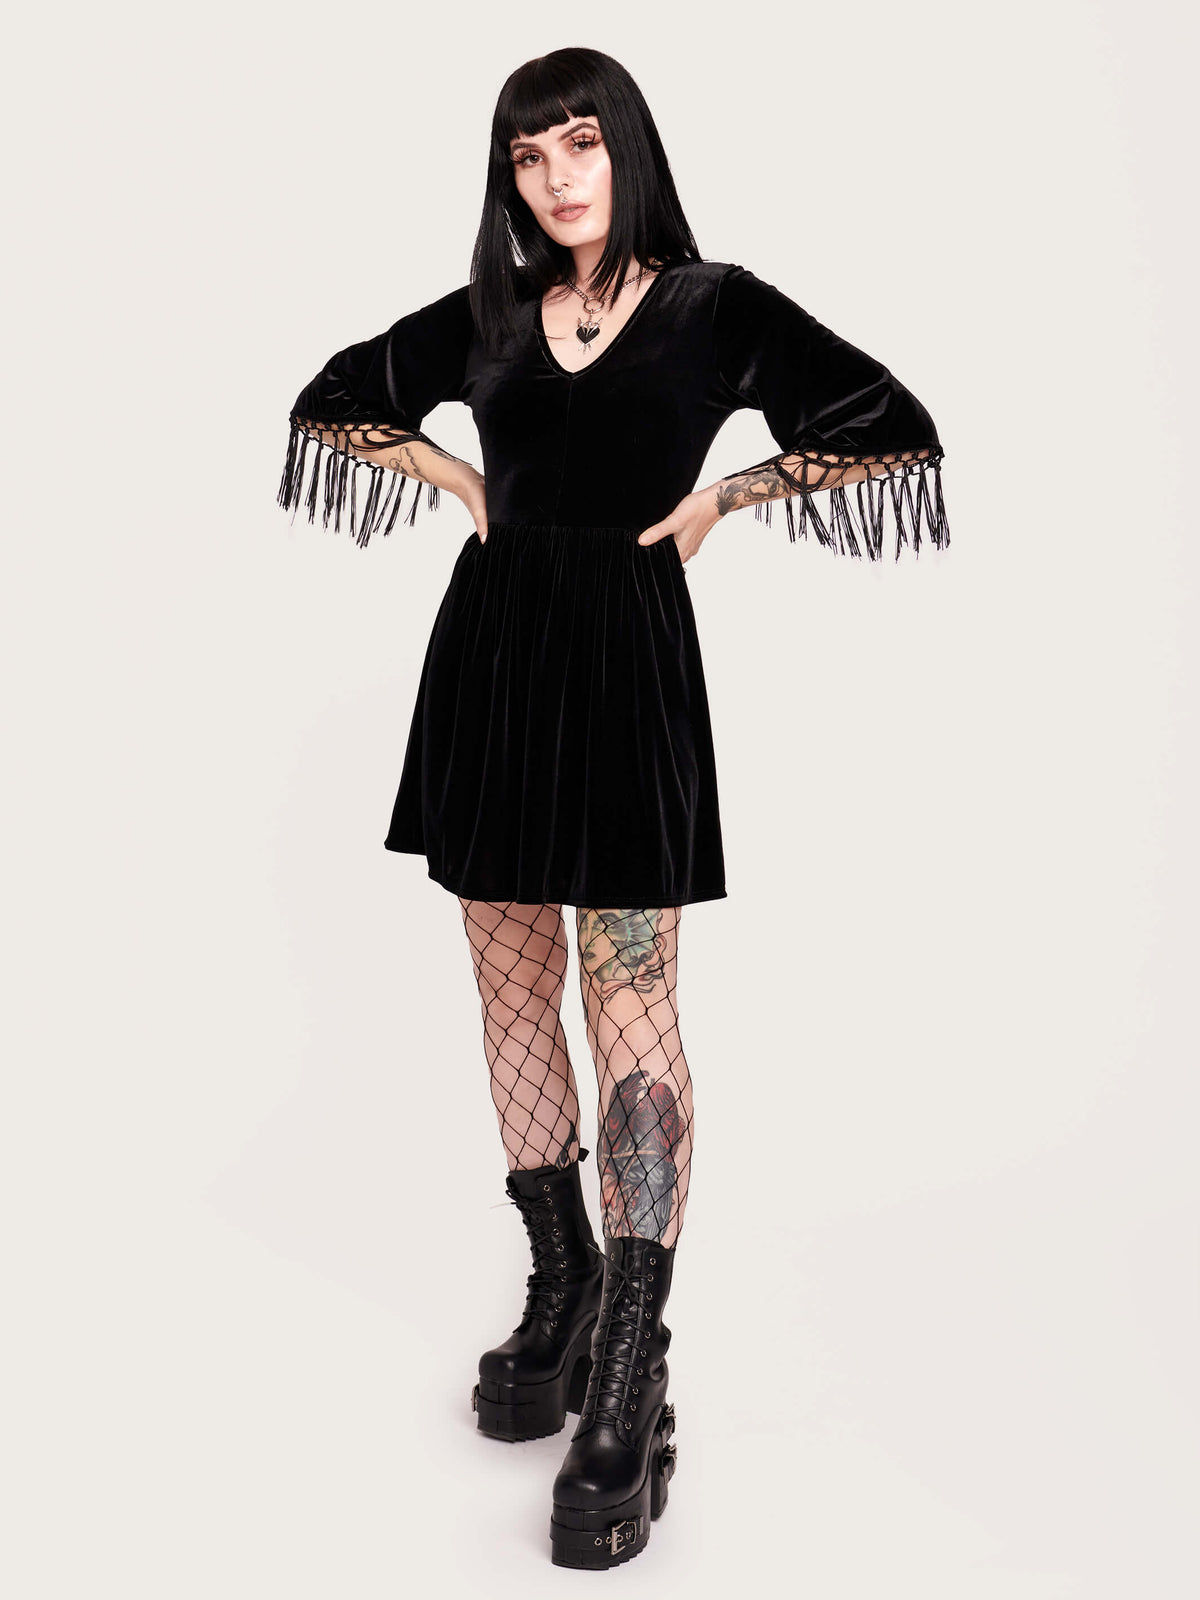 Good witch or bad witch? Day or evening? You decide when you wear our stretch velvet dress with fringe details on the sleeves. Stretch elastic at waist. Goth grunge fashion, alt girl fashion, goth clothing, gothic dress, black velvet dress, egirl fashion, emo fashion